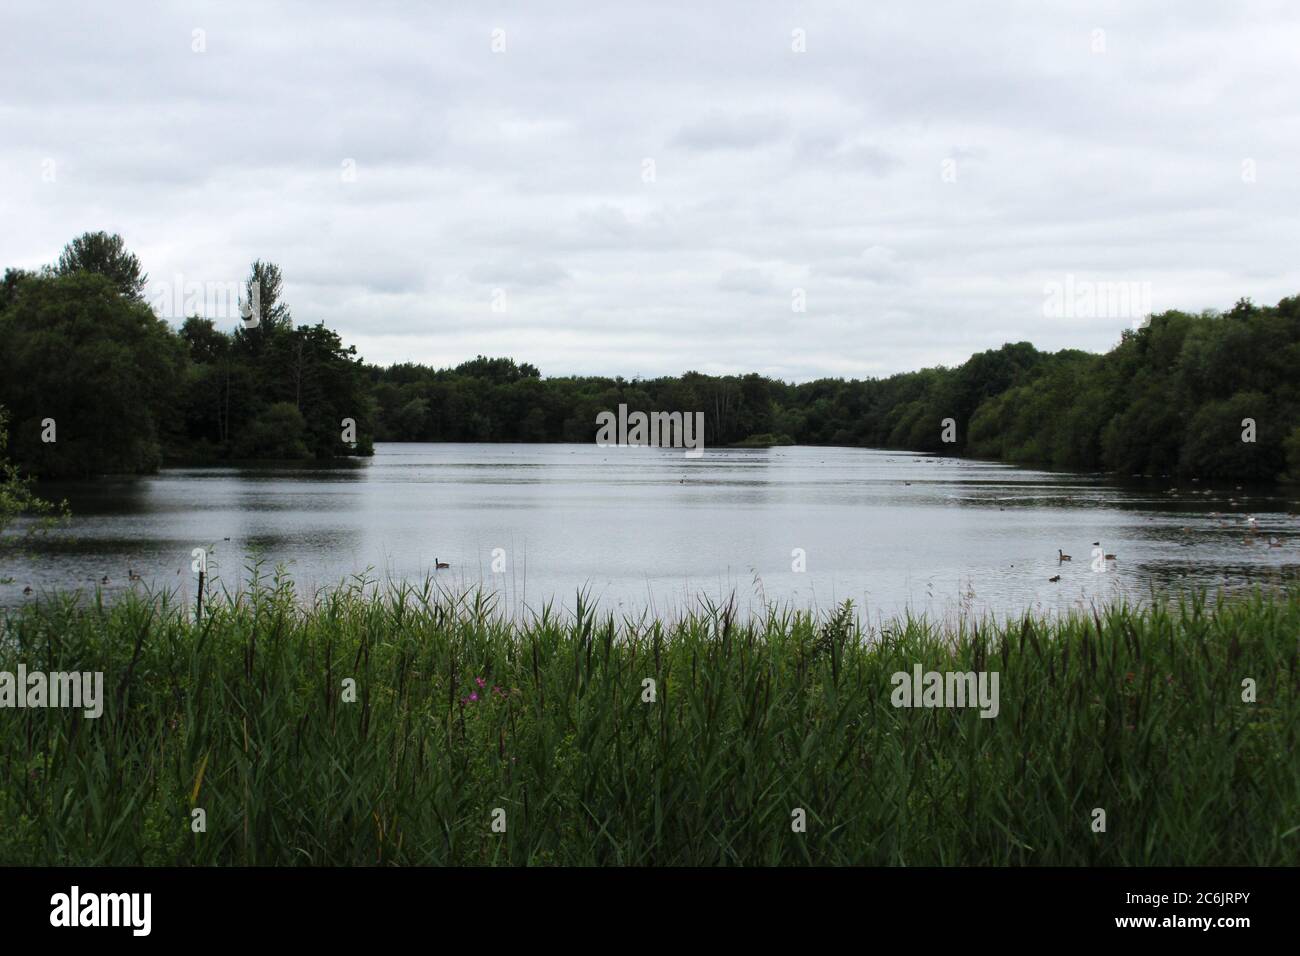 Scenery of Chorlton water park, including a lake and thick trees, in Manchester, England Stock Photo